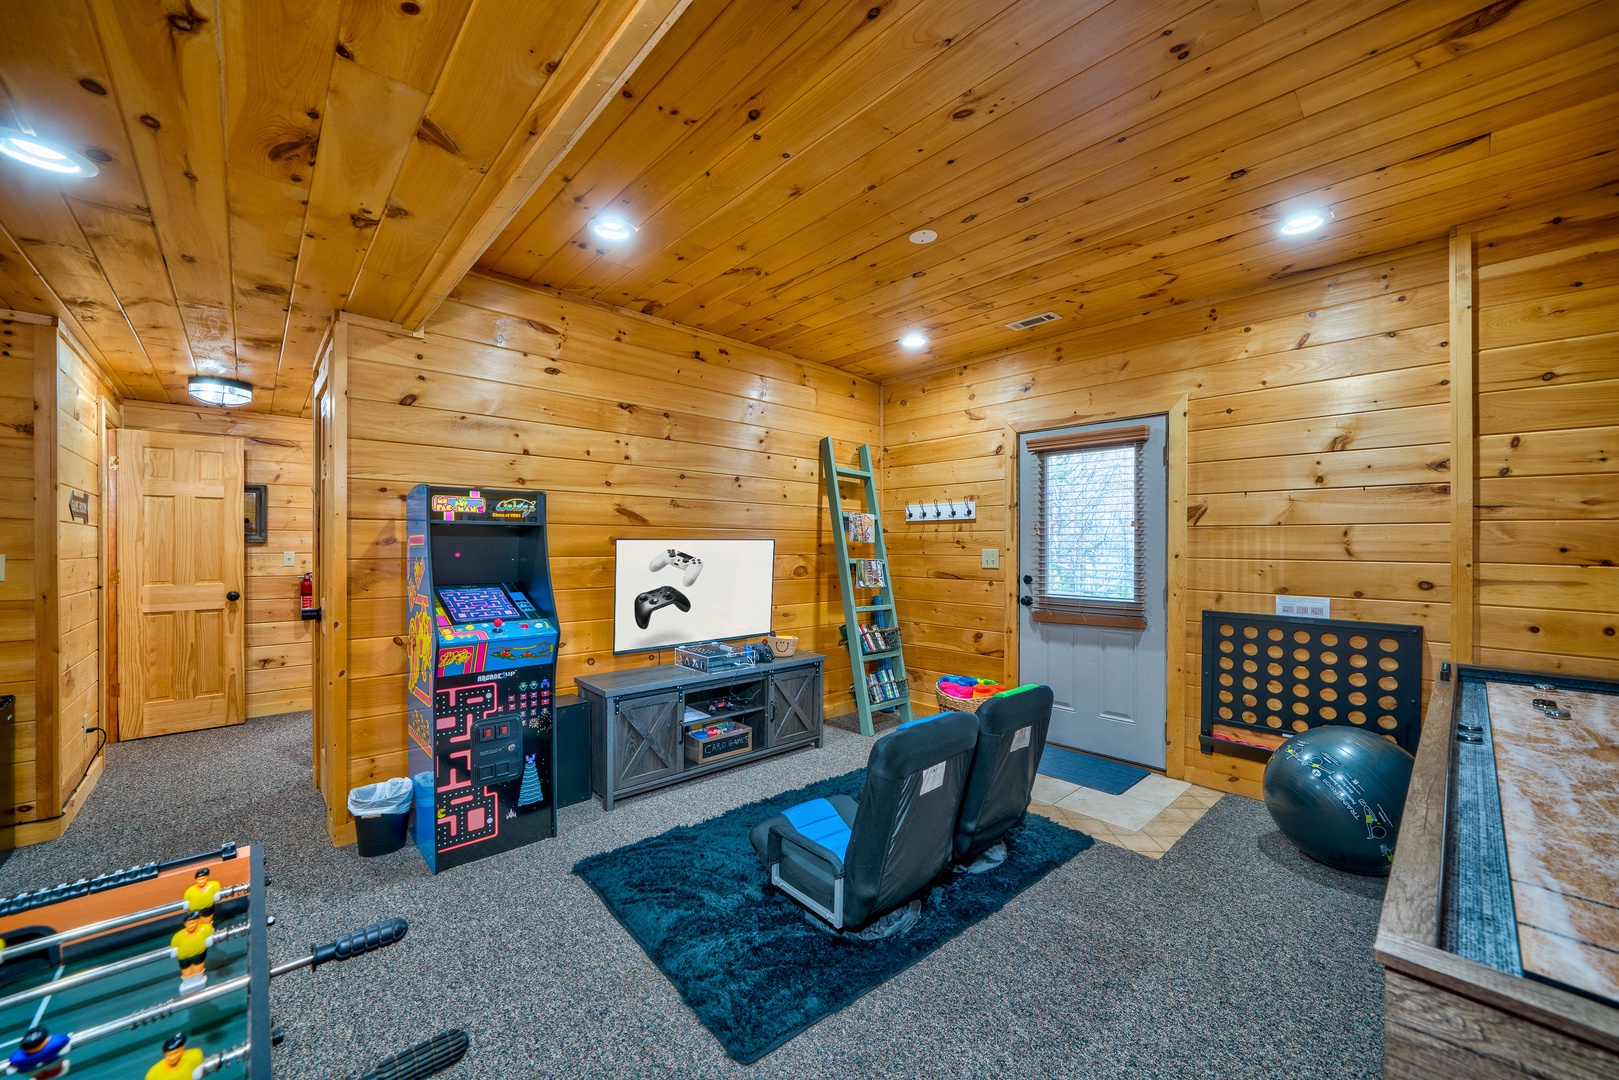 Entertainment haven, with foosball, shuffleboard, arcade, and gaming system in the Game Room